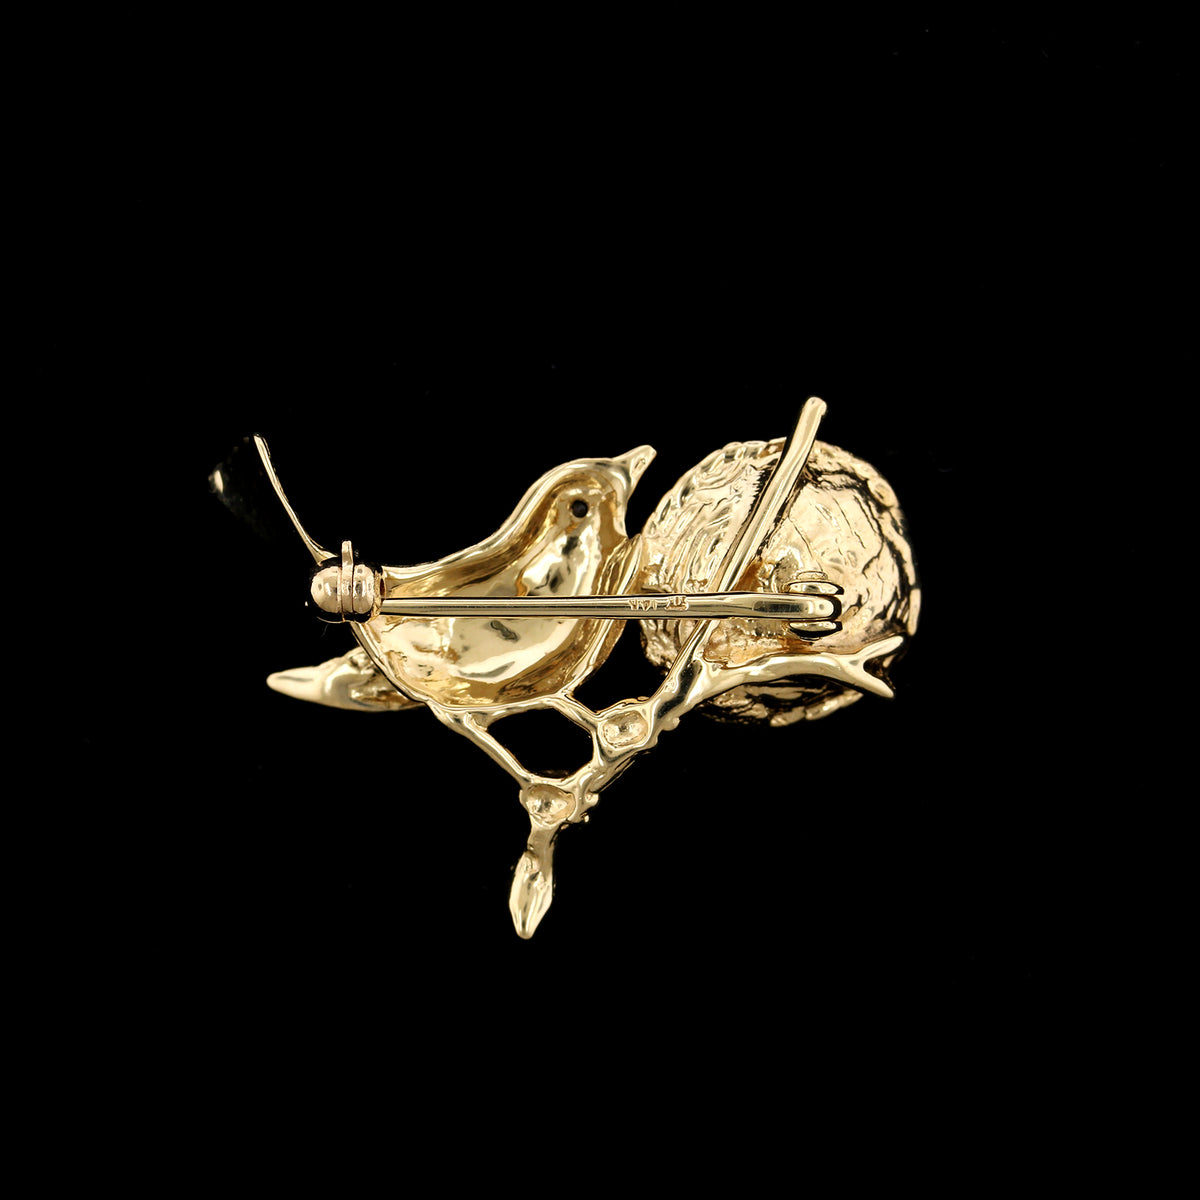 14K Yellow Gold Estate Cultured Pearl Bird with Nest Pin